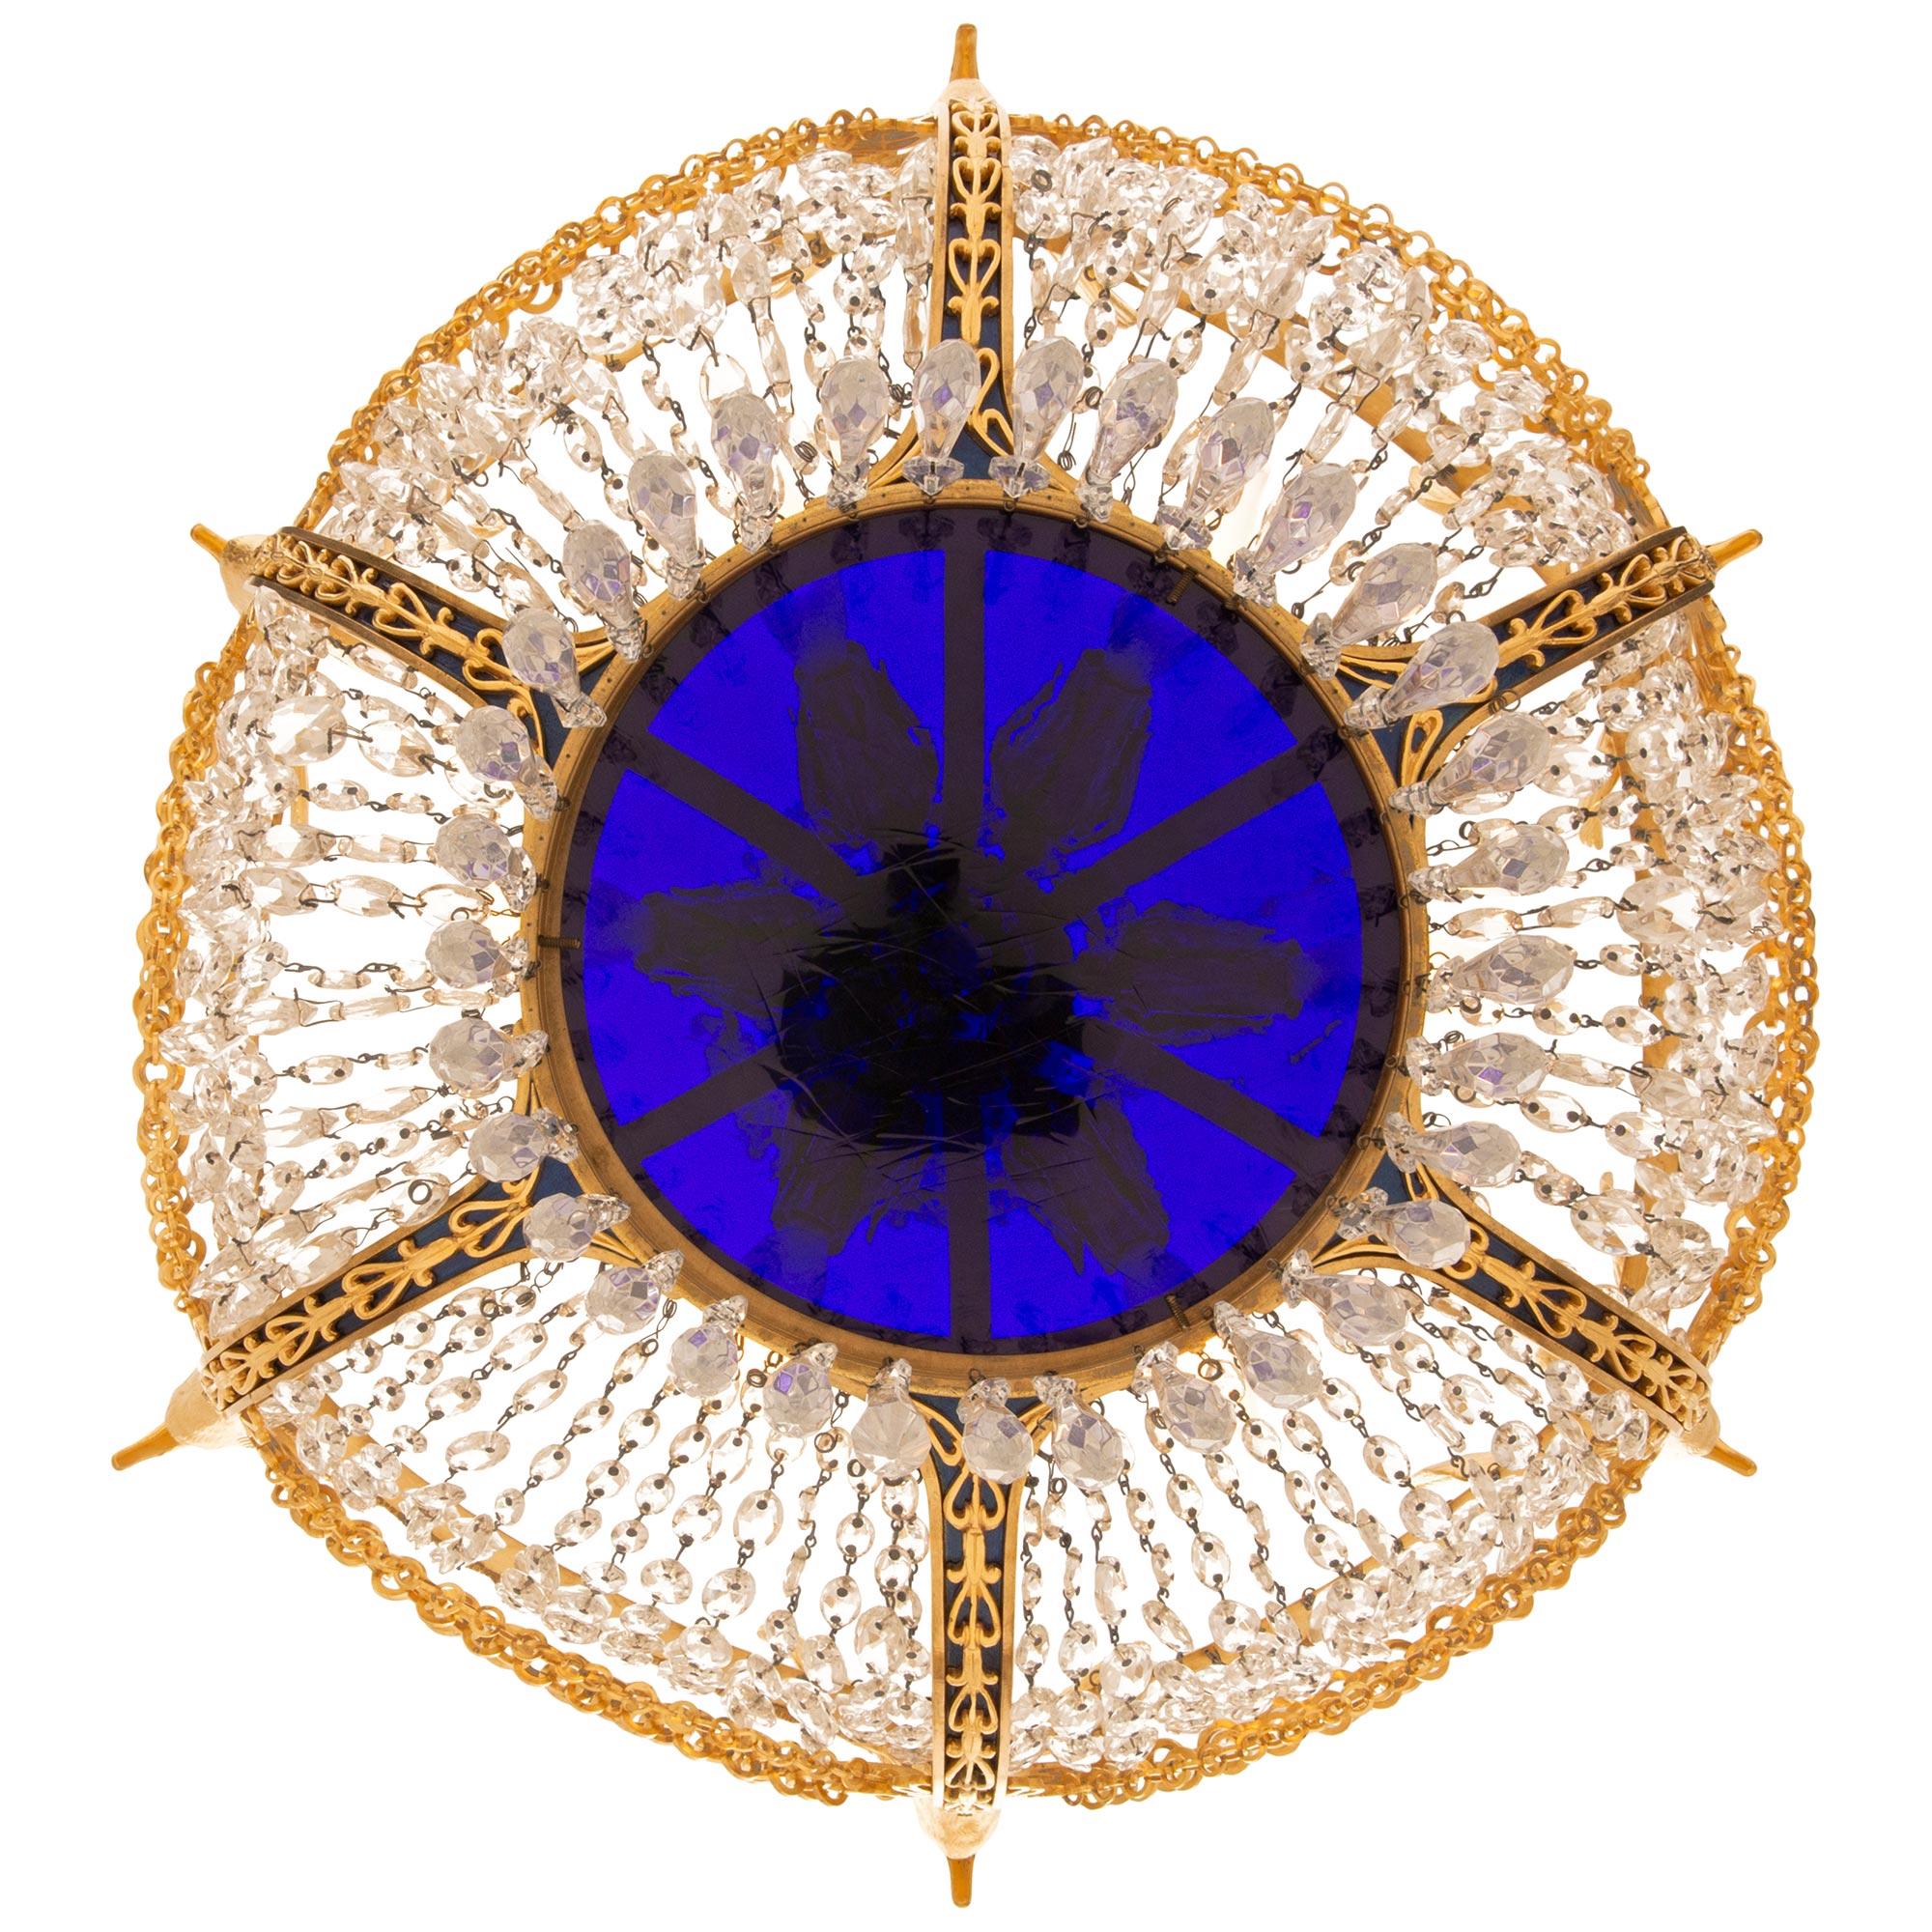 A stunning and highly detailed Russian 19th century Neo-Classical st. Crystal, Ormolu, enameled Bronze and Glass chandelier. This most decorative seven light chandelier is centered around a circular fitted cobalt blue glass tier with prism shaped